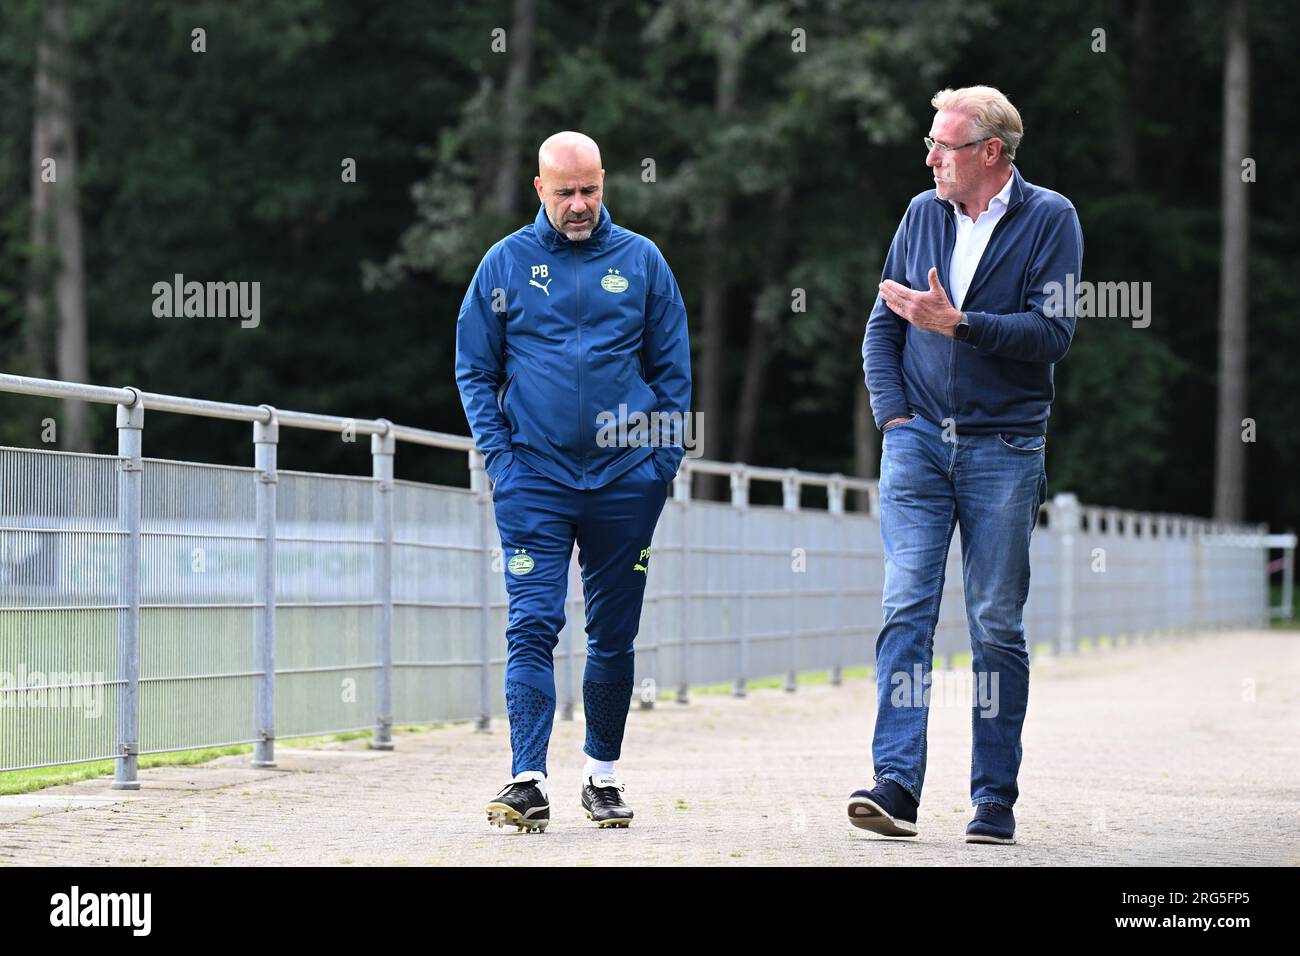 EINDHOVEN - Coach Peter Bosz, former goalkeeper Hans van Breukelen, who is a member of the PSV RVC until September 1. PSV trains at the Herdgang prior to the third qualifying round Champions League match against Austria's Sturm Graz. The winner of that preliminary round will compete in the play-offs for a ticket to the group stage. ANP OLAF KRAAK Stock Photo